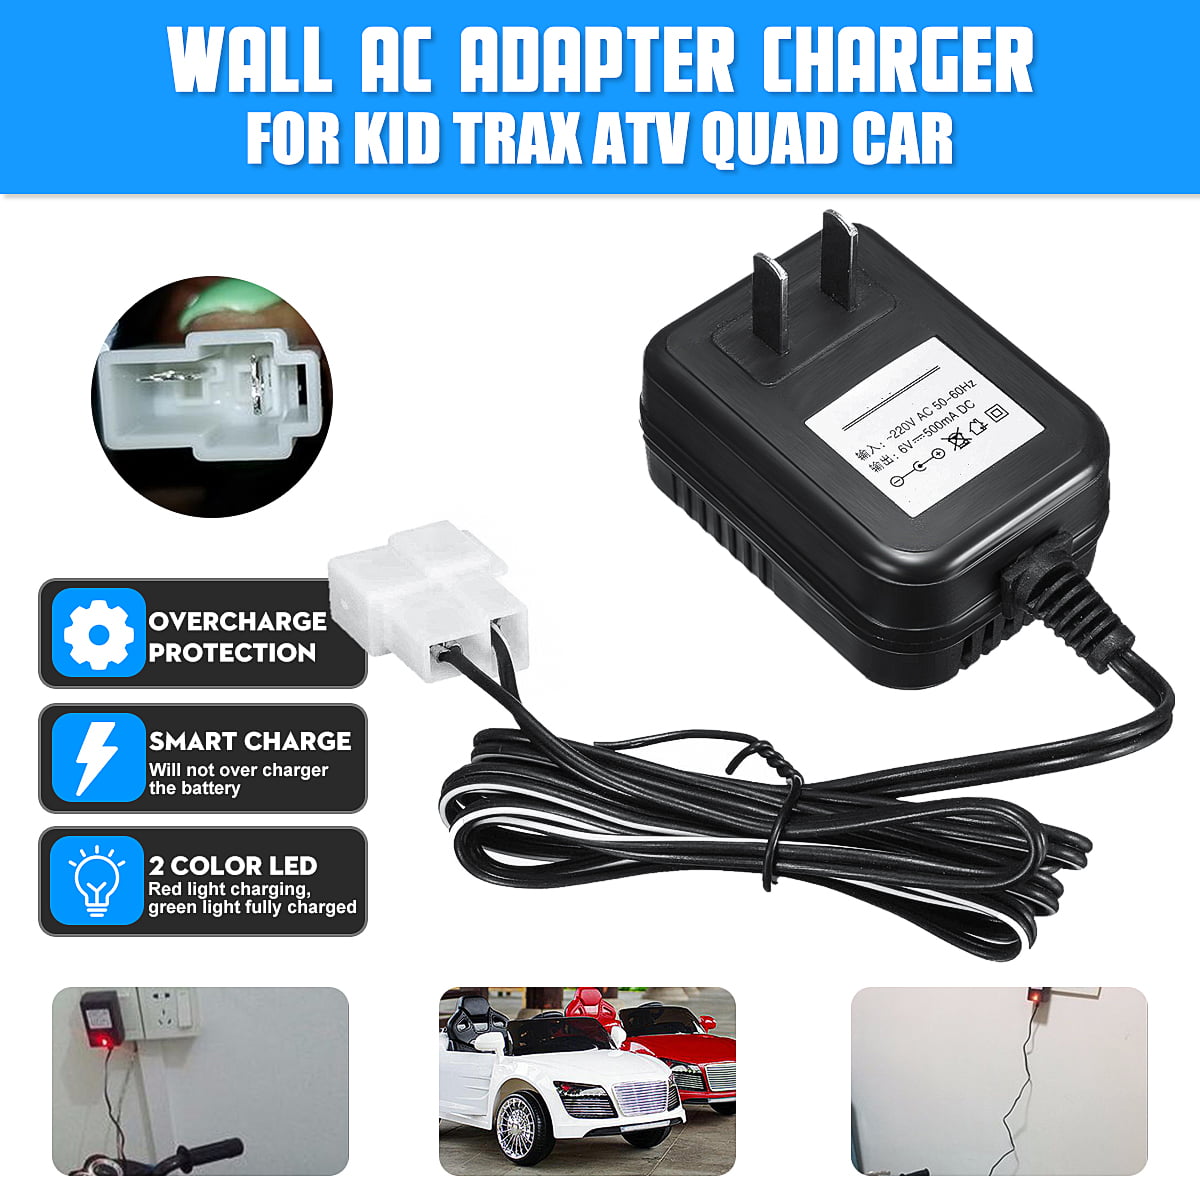 6V Wall AC Adapter Charger Power Supply For Kid TRAX ATV Quad Ride On Car DL5 